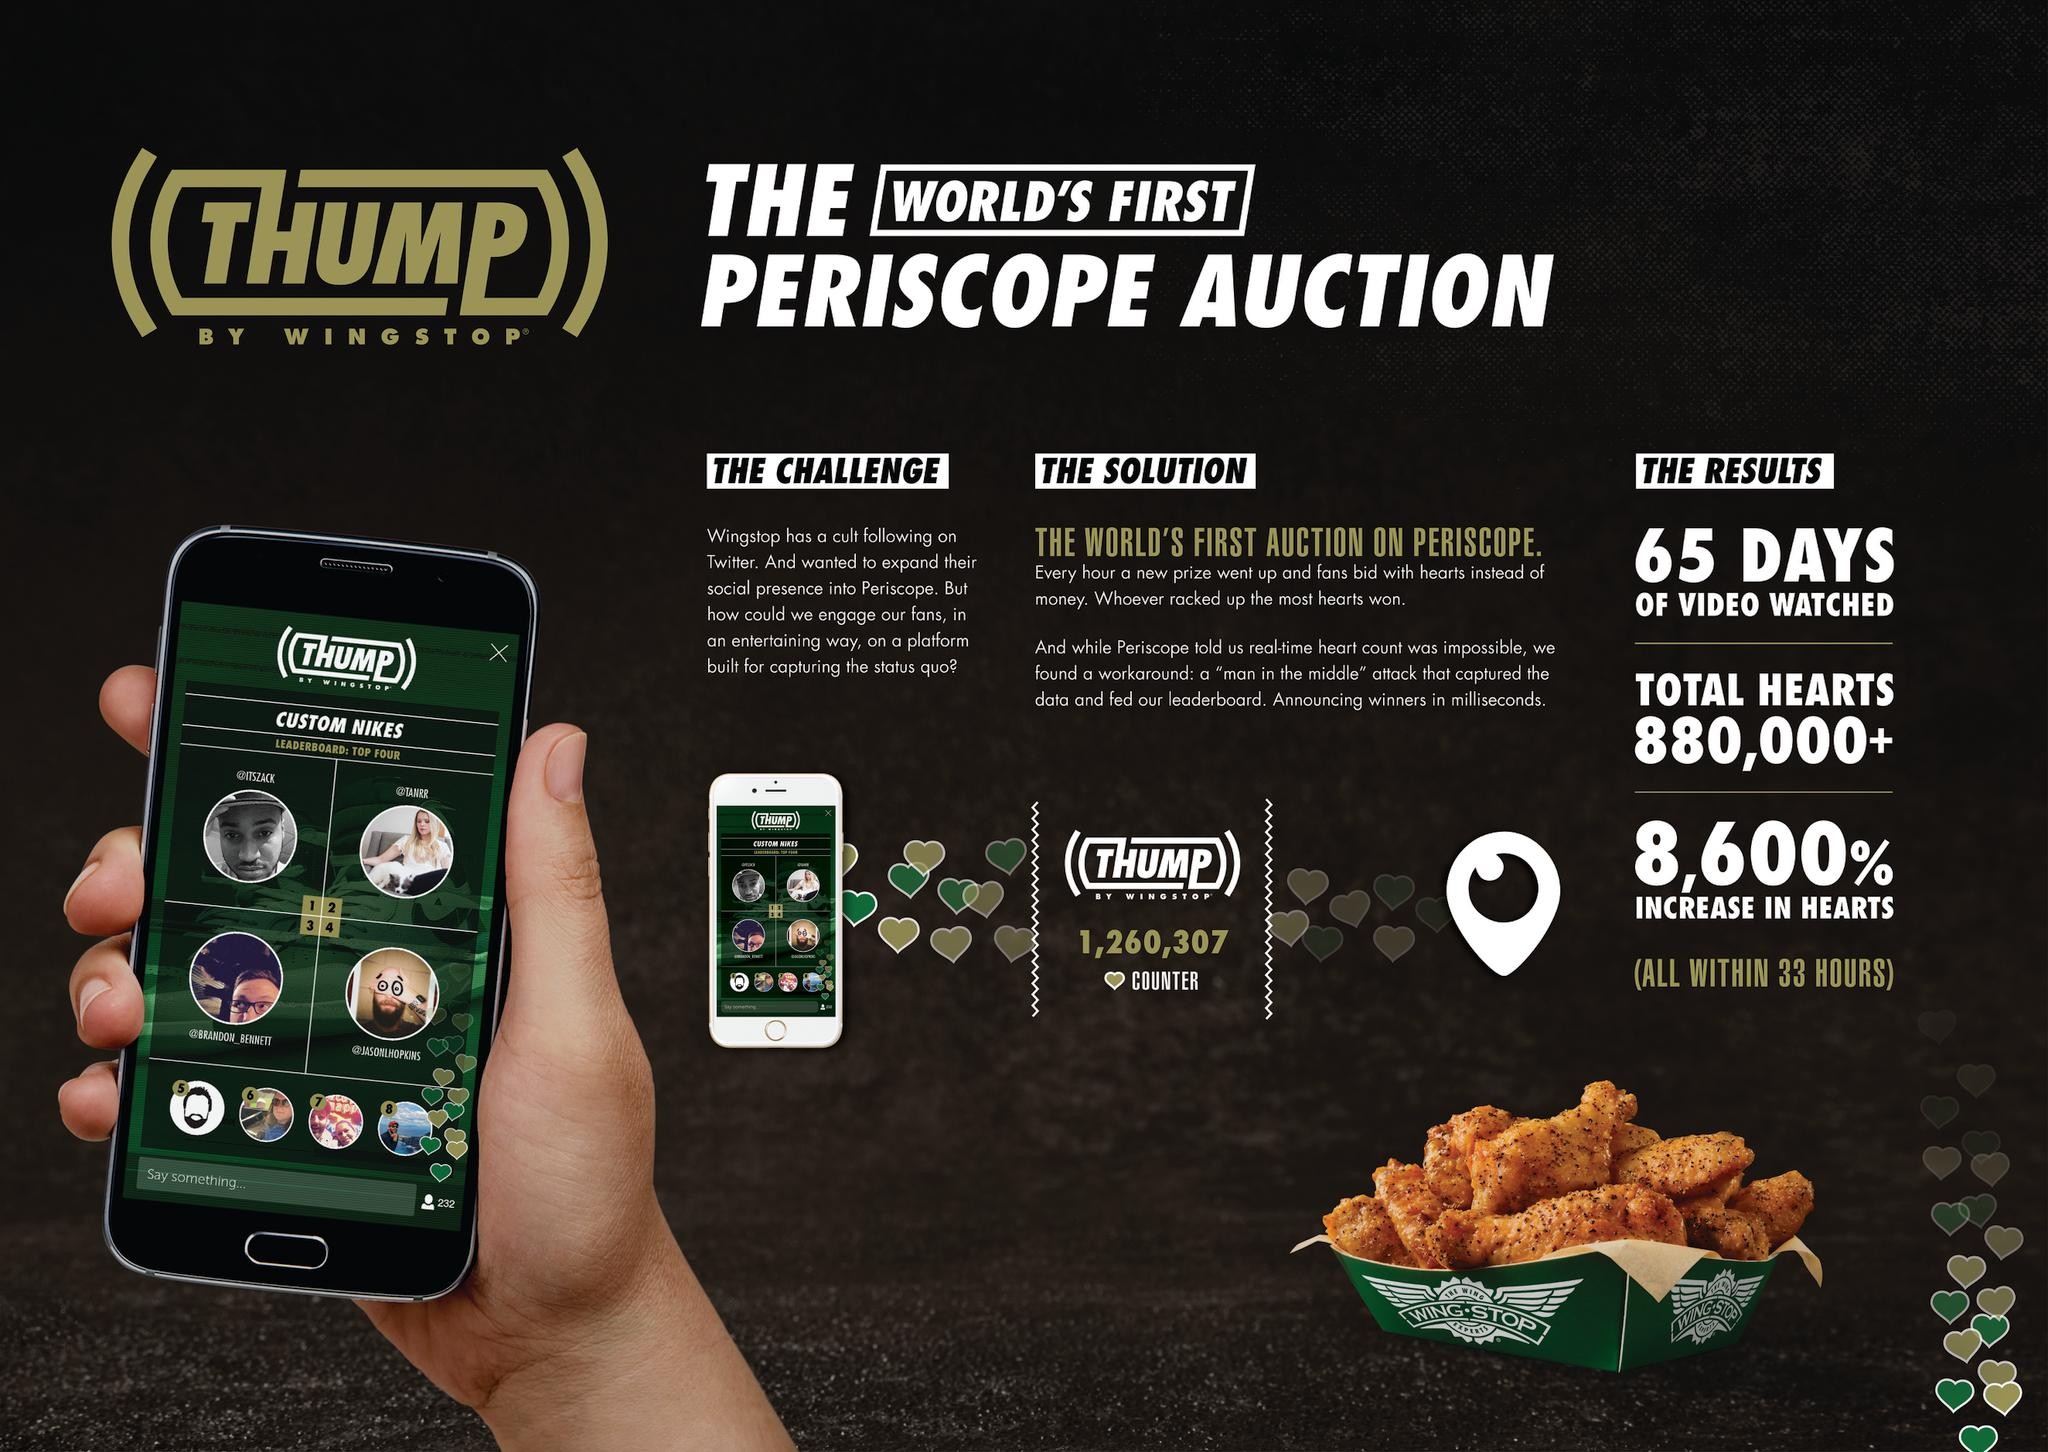 THUMP BY WINGSTOP